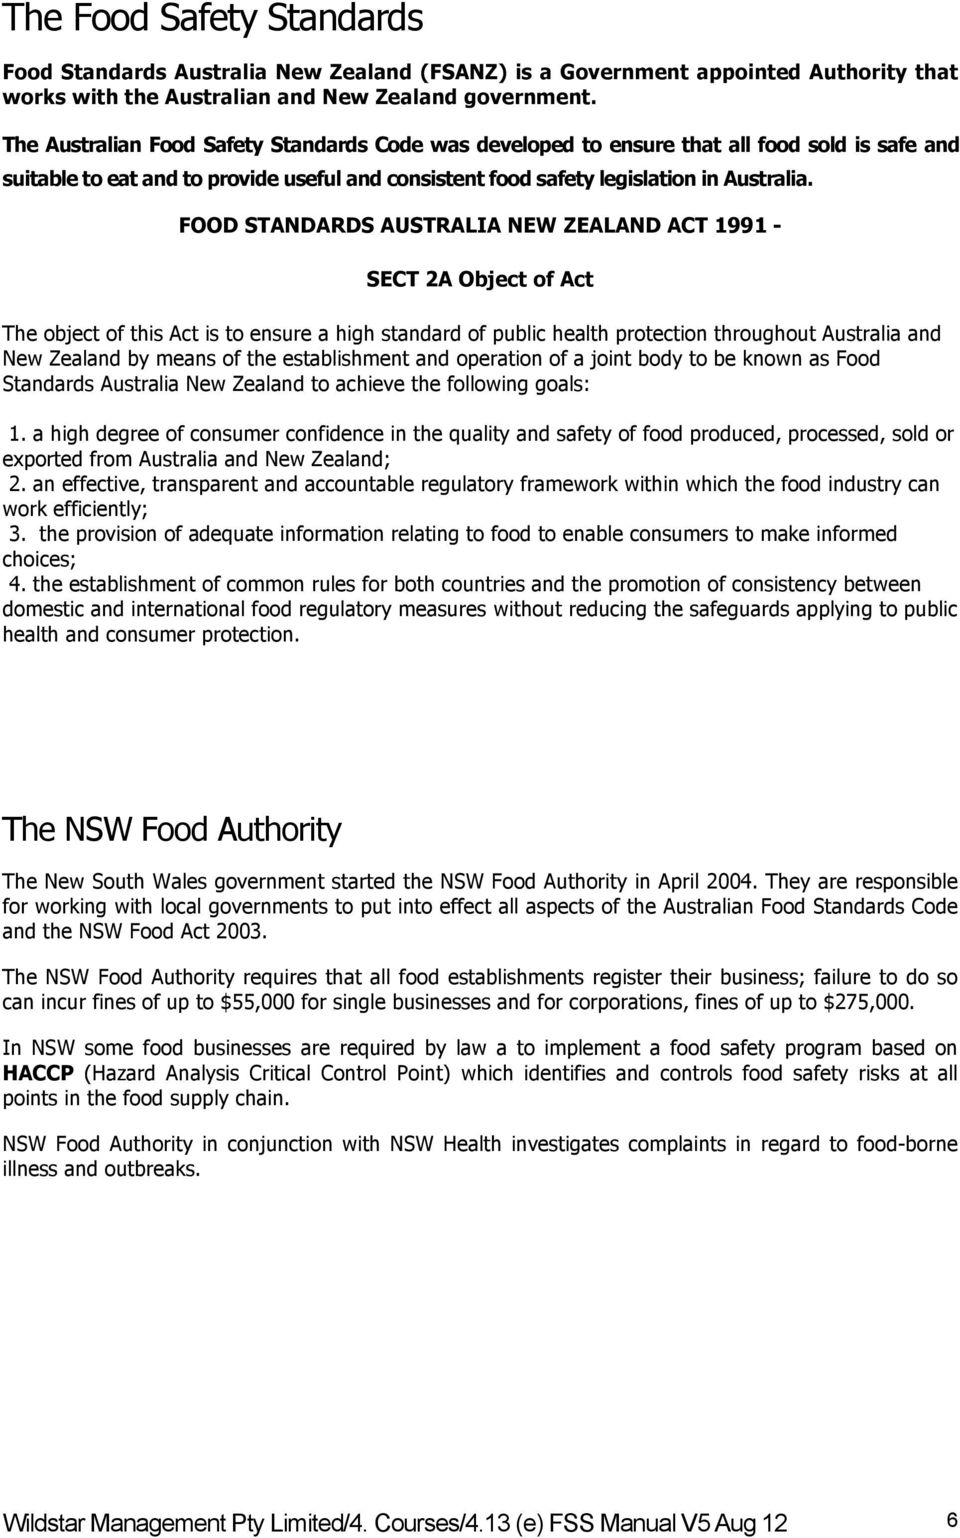 FOOD STANDARDS AUSTRALIA NEW ZEALAND ACT 1991 - SECT 2A Object of Act The object of this Act is to ensure a high standard of public health protection throughout Australia and New Zealand by means of